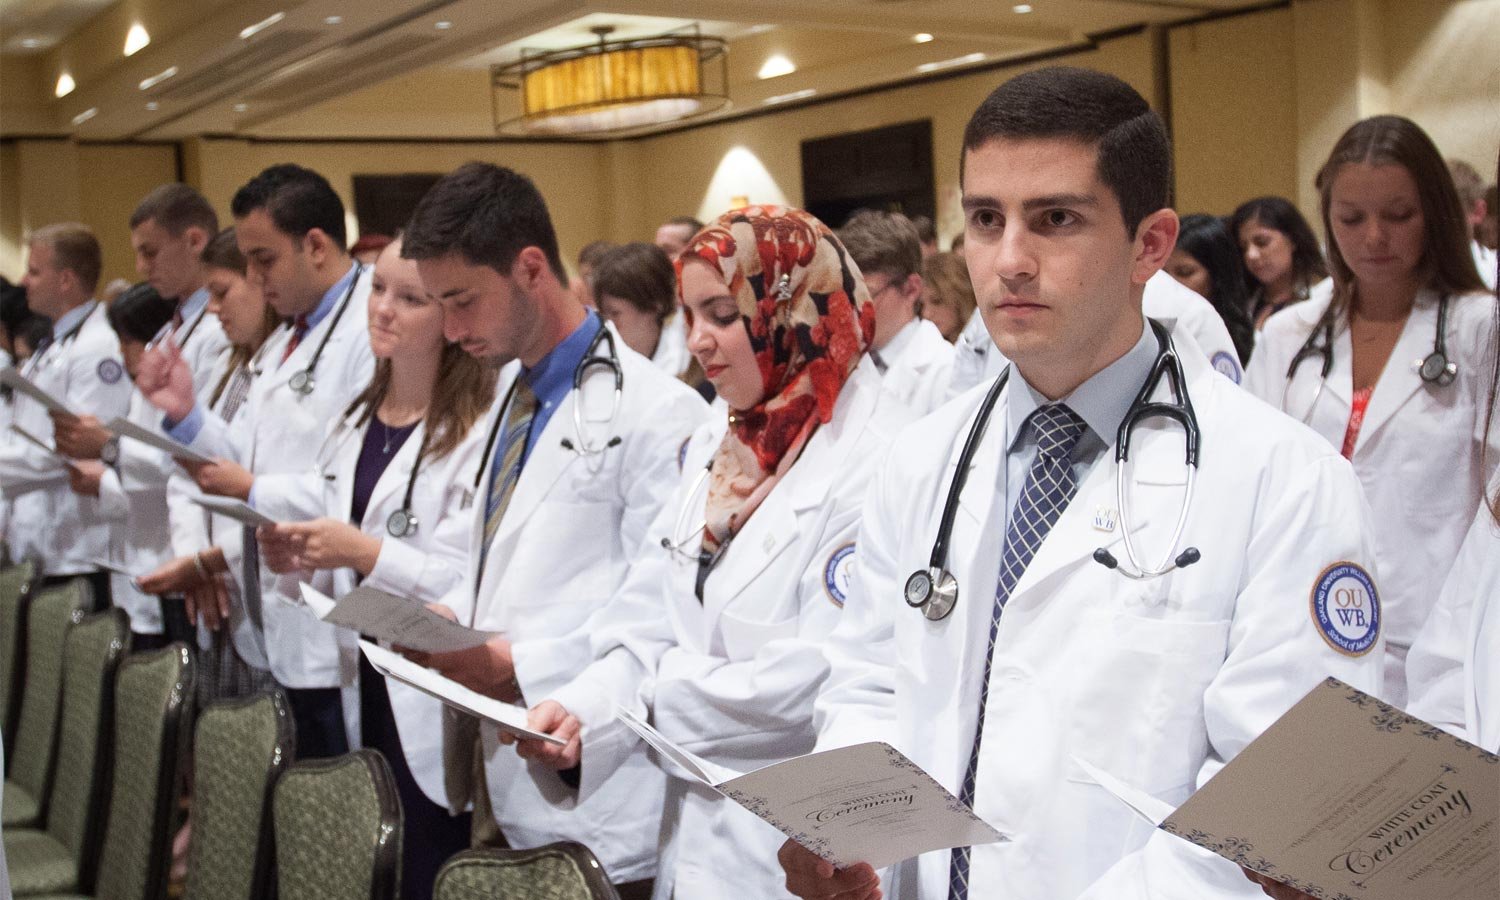 OUWB Class of 2020 welcomed at White Coat Ceremony - - Around Campus - Fall  2016 - OU Magazine - Oakland University